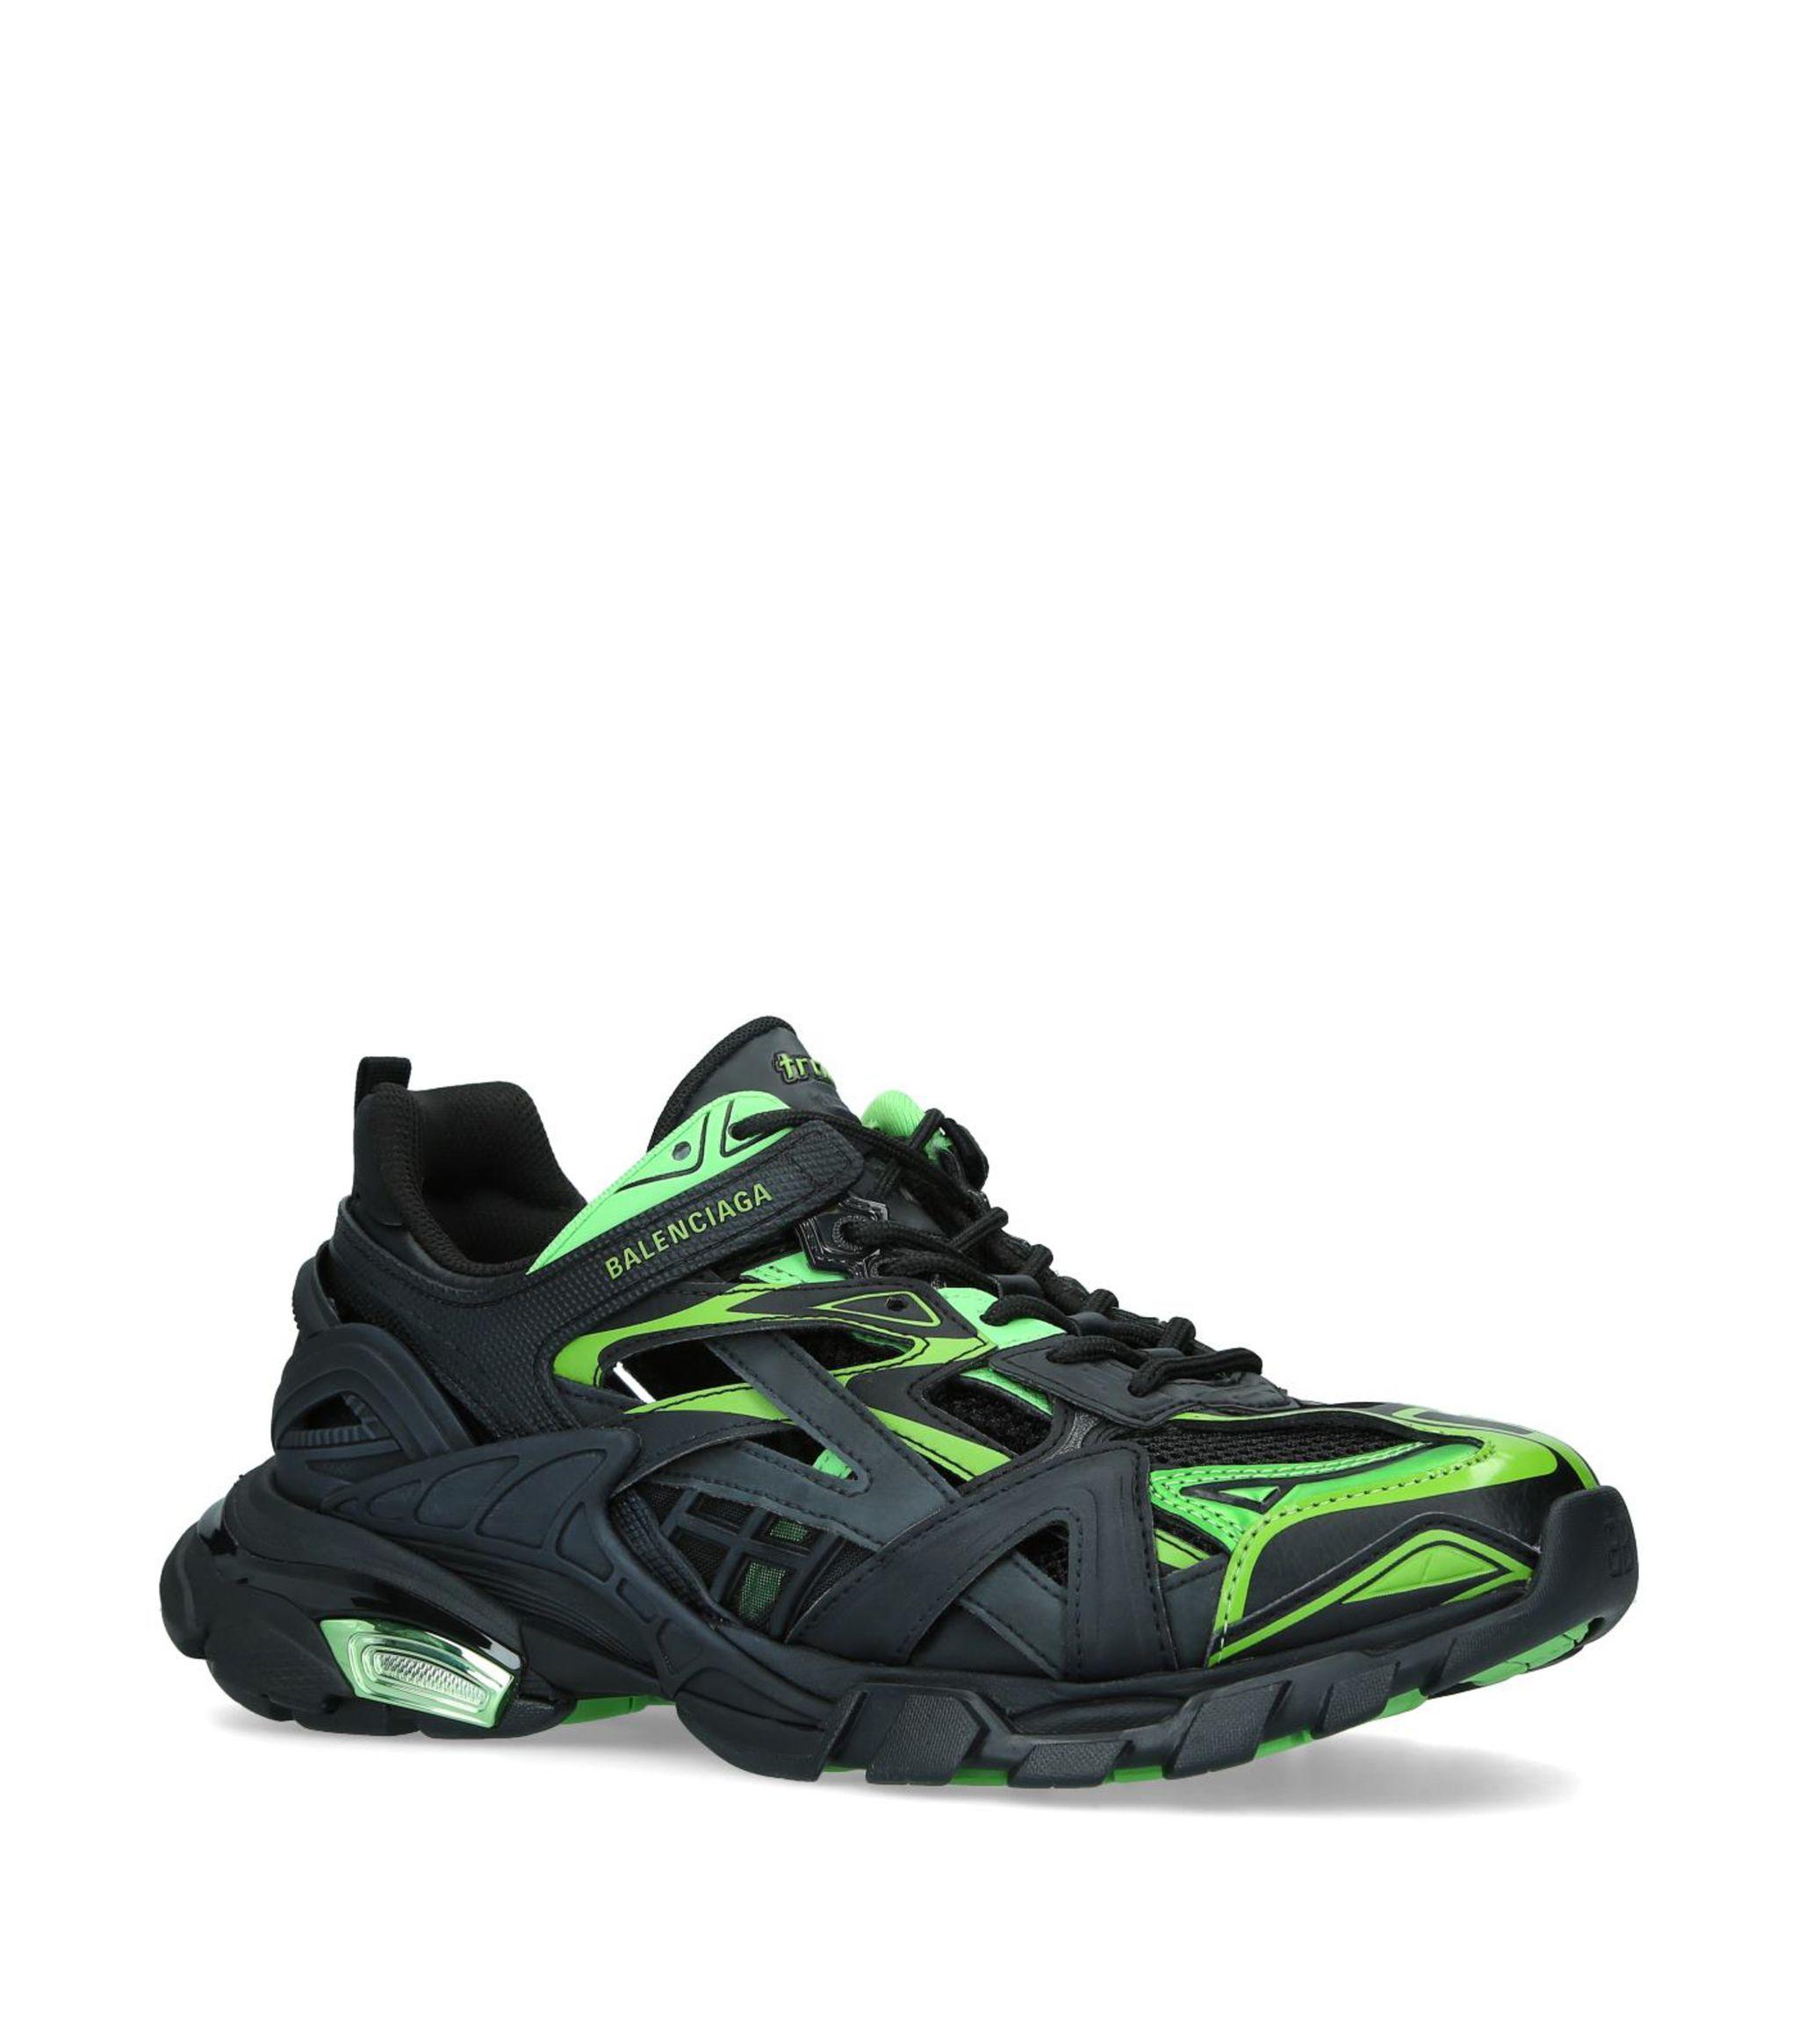 Balenciaga Rubber Track 2 Sneakers in Green for Men - Lyst